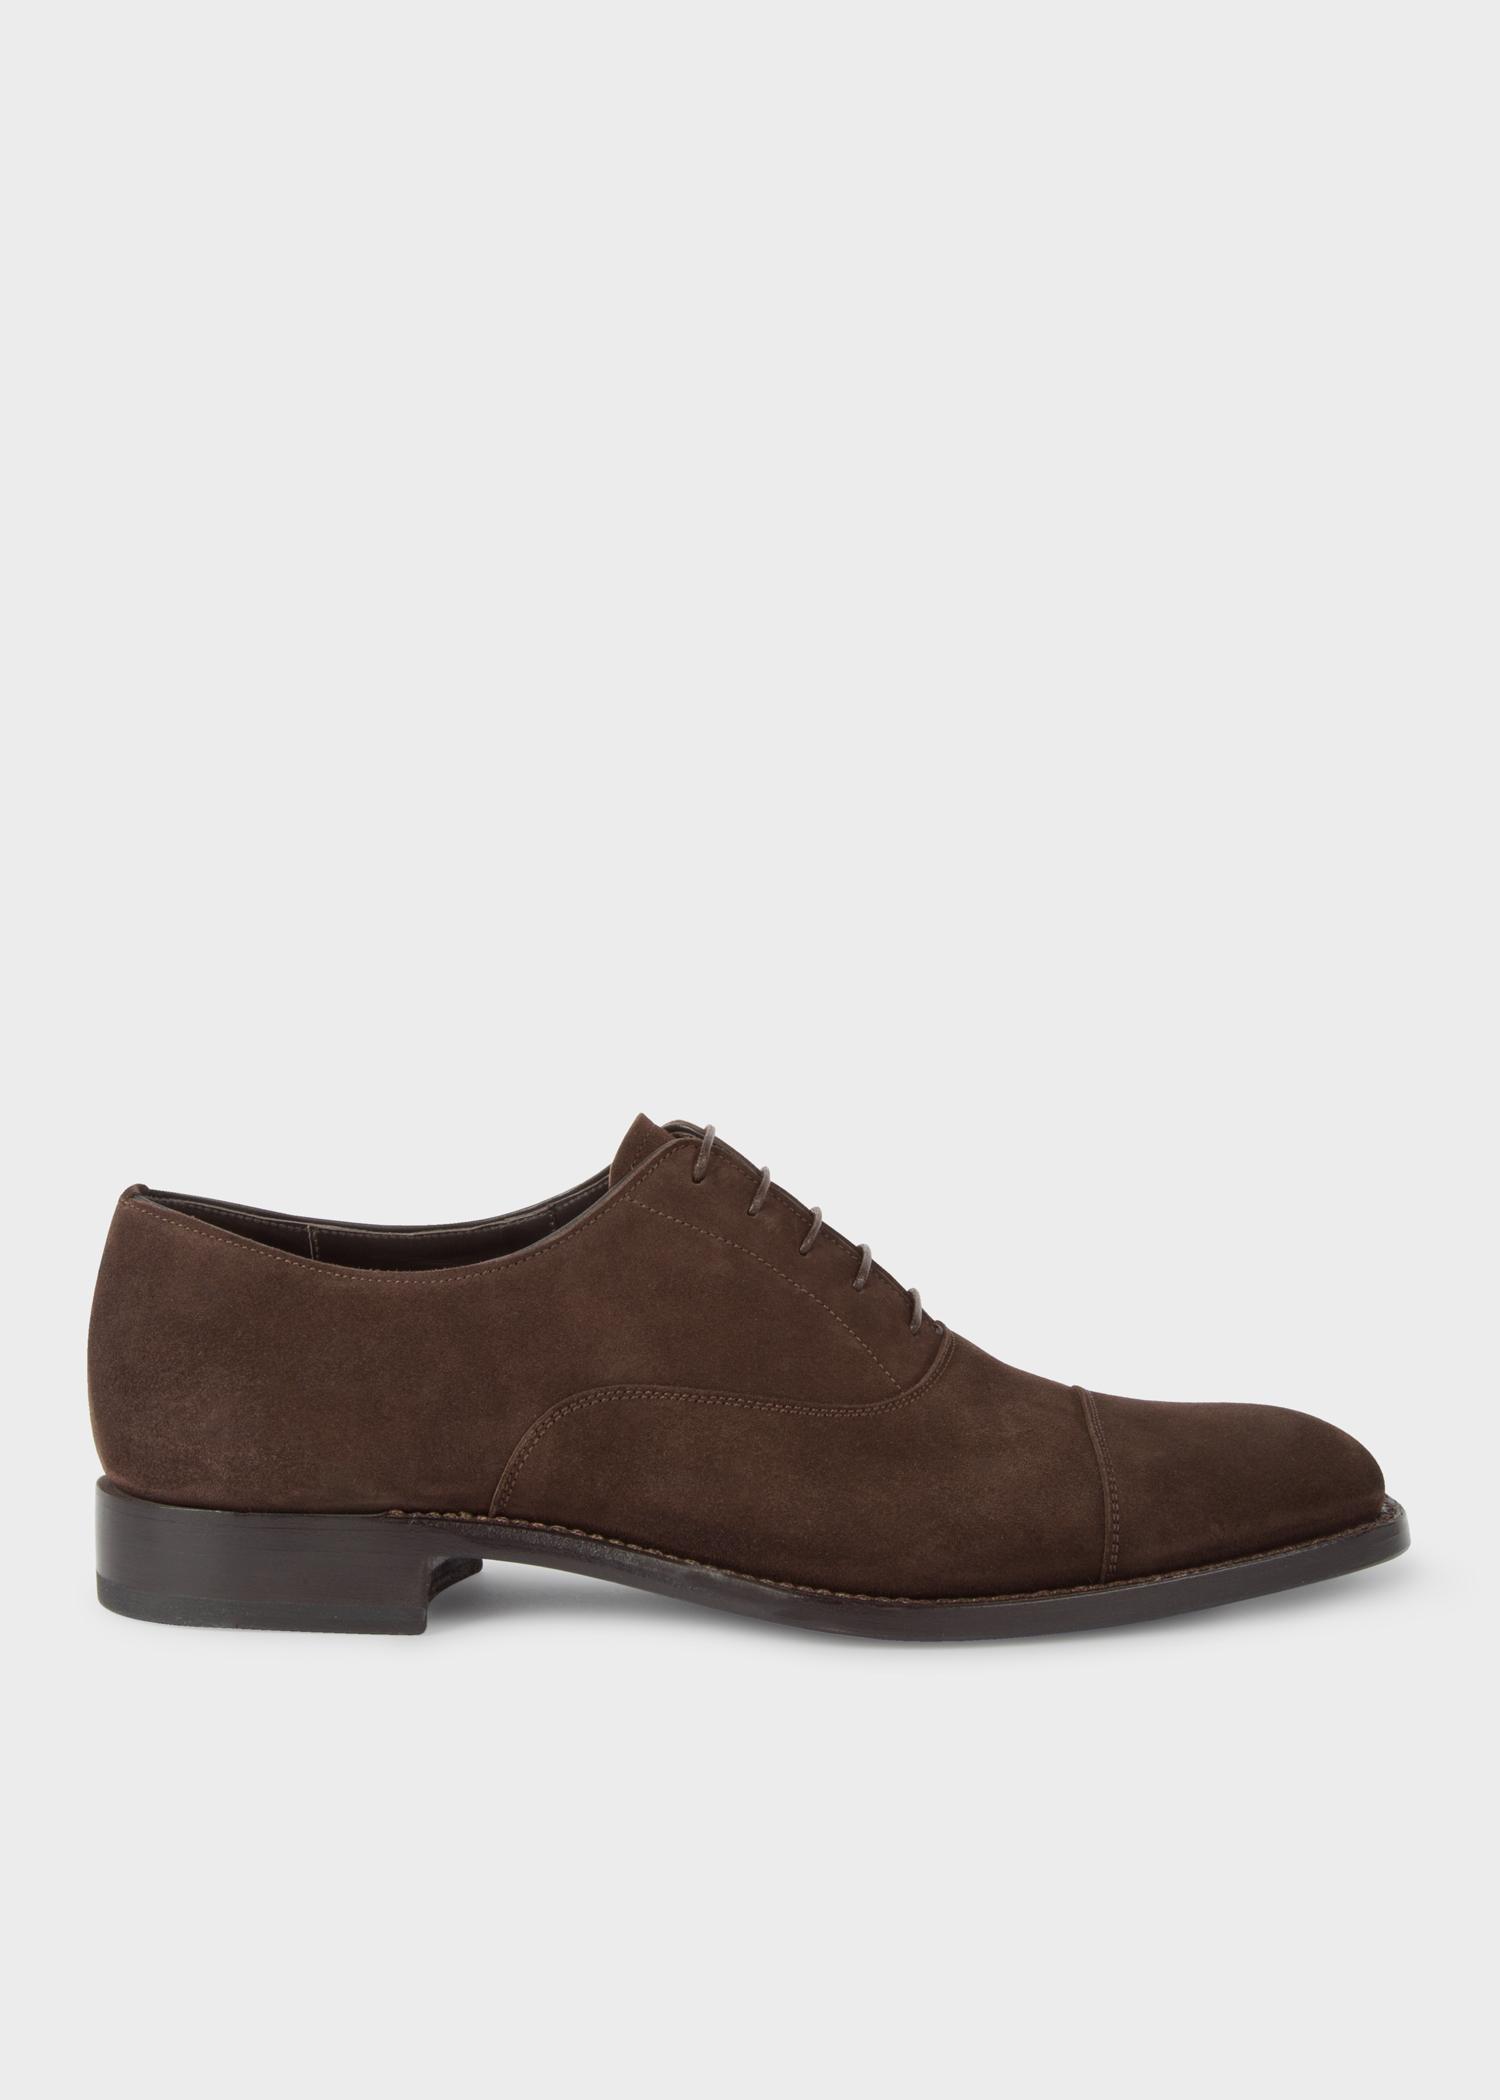 Paul Smith Dark Brown Suede 'carlisle' Oxford Shoes for Men - Lyst